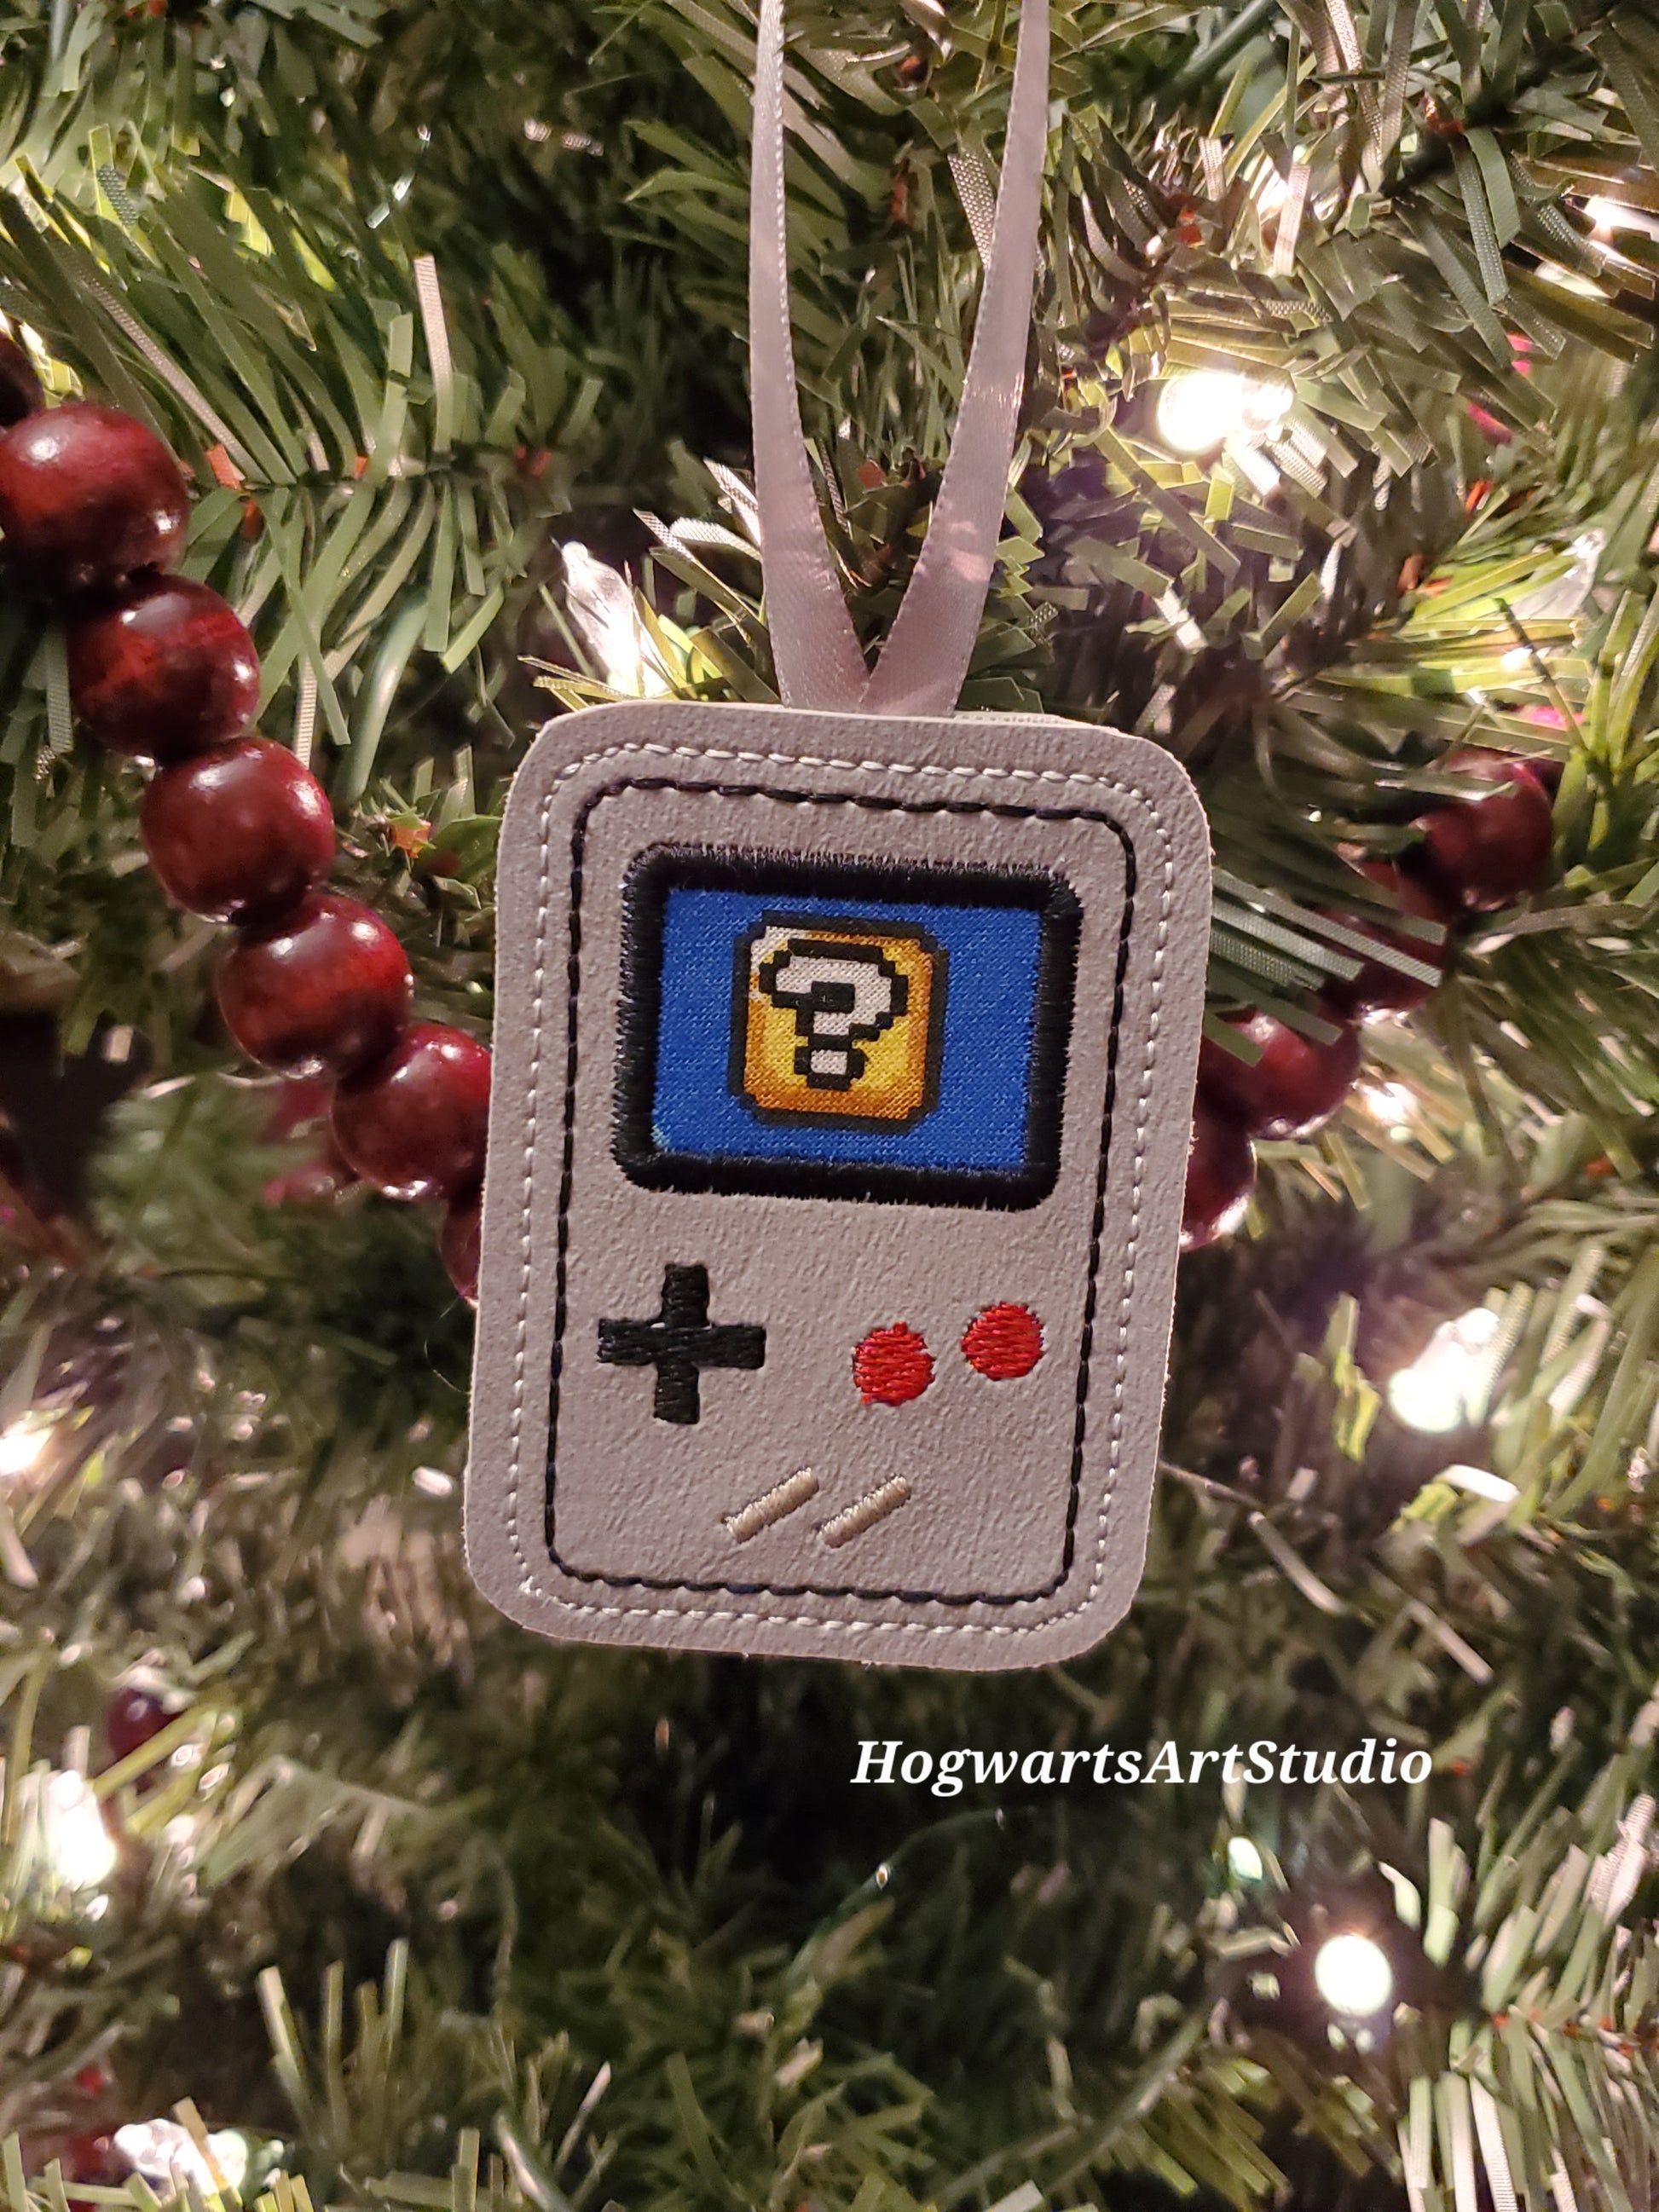 game console ornament on a tree